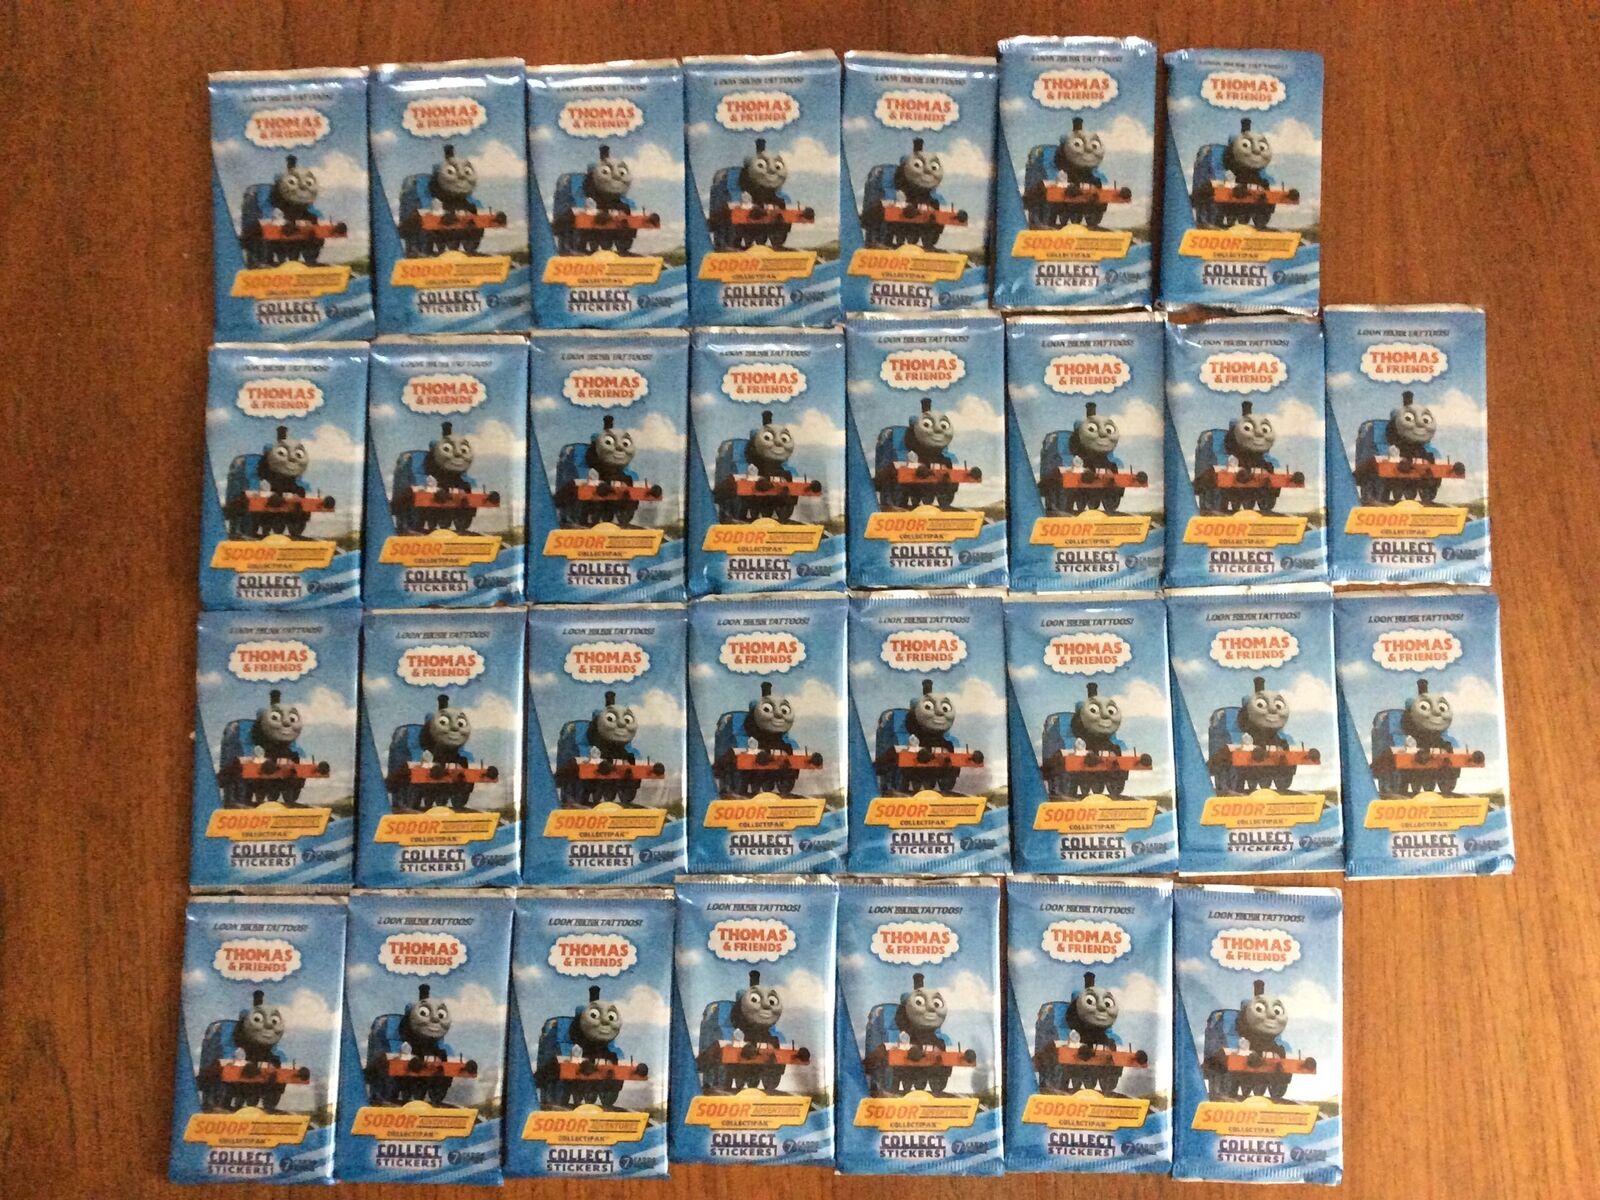 THOMAS & FRIENDS Trading Cards  Lot of 30 packs  Sodor Adventures Collectipak